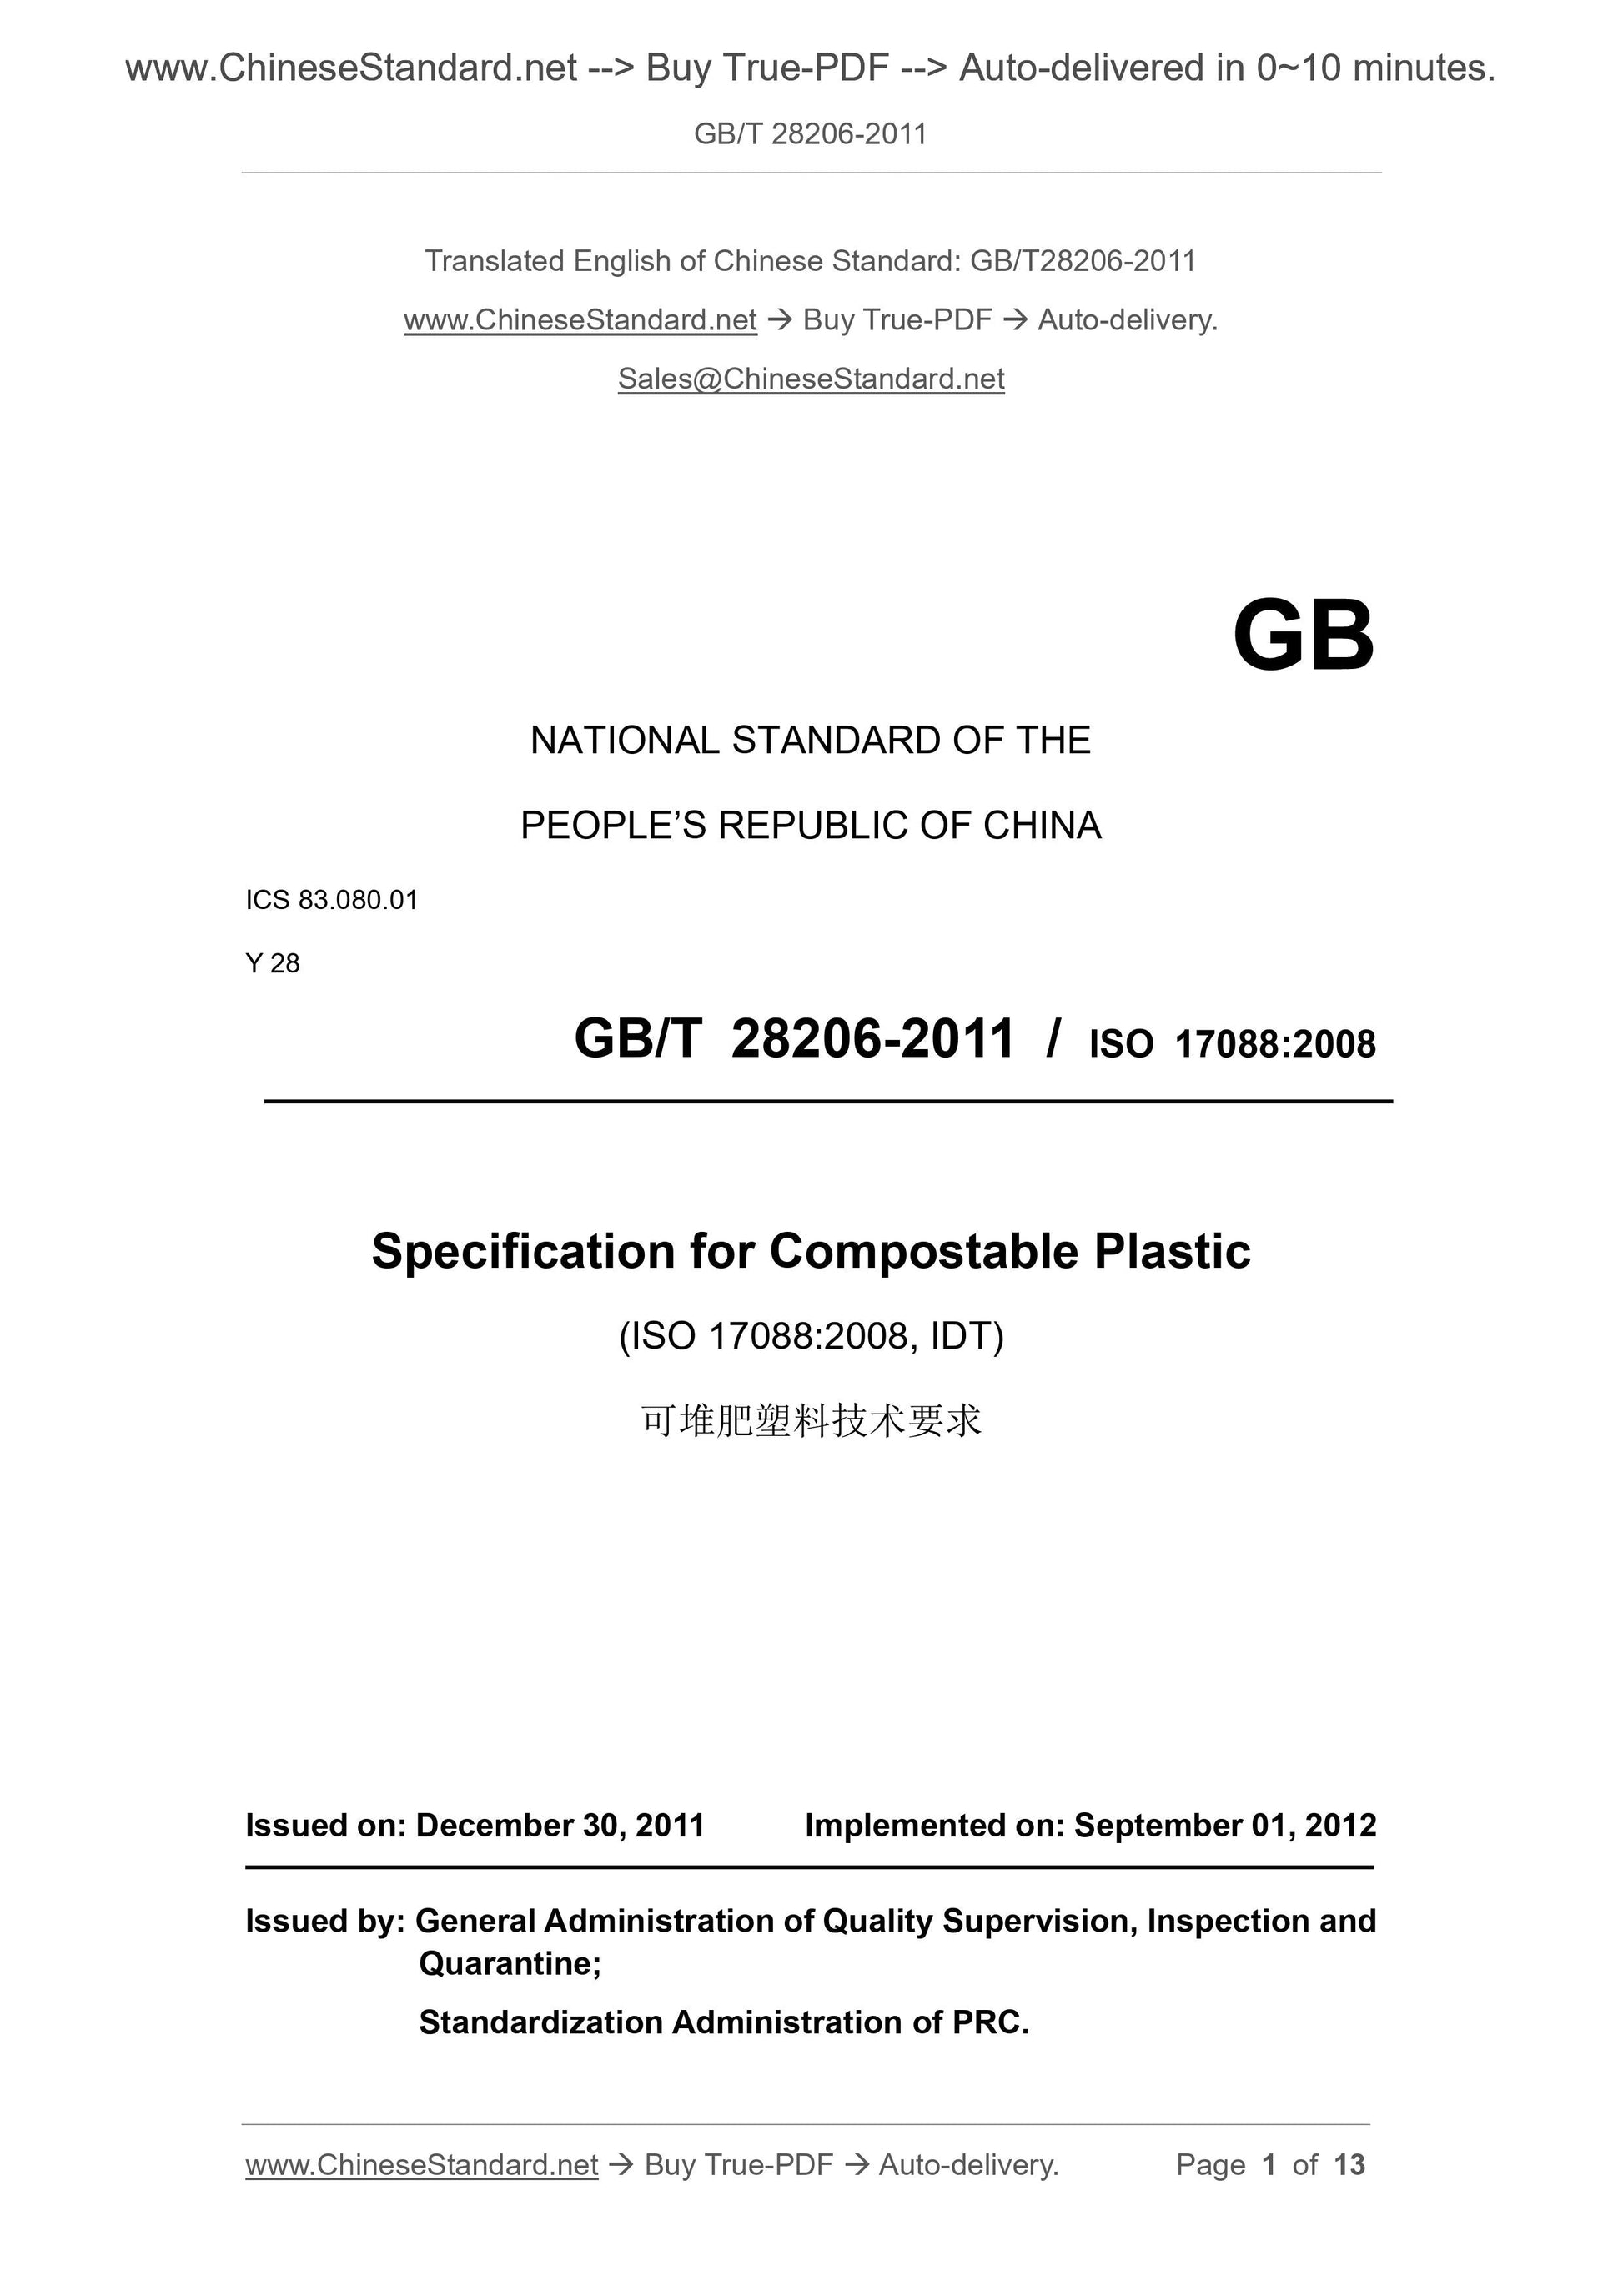 GB/T 28206-2011 Page 1